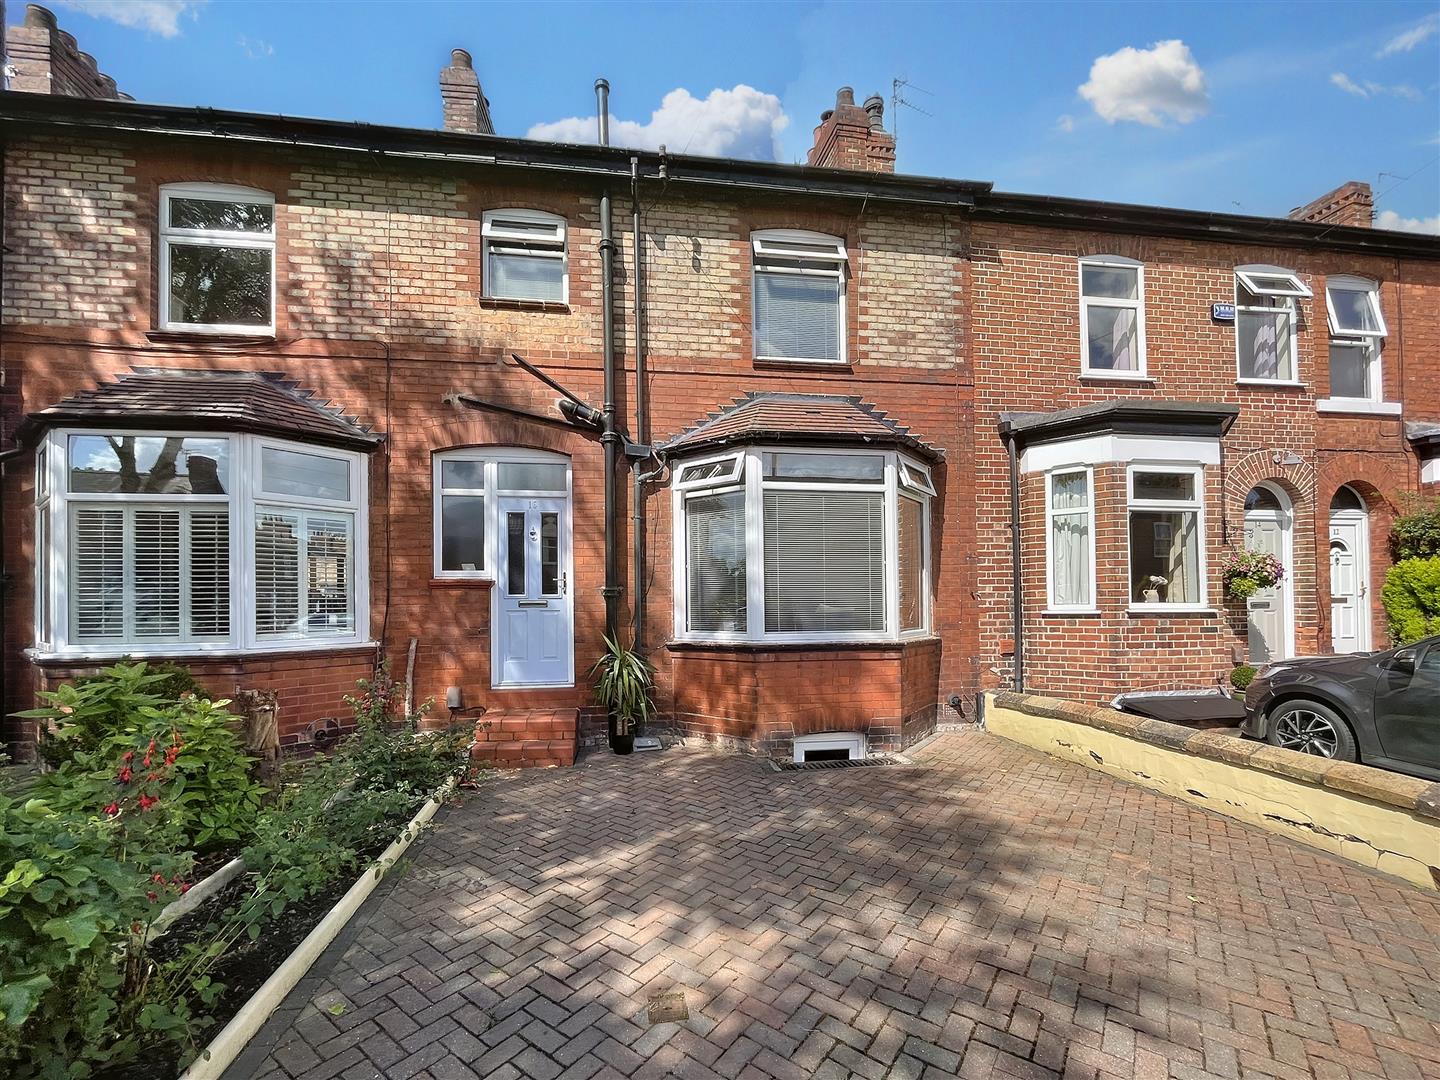 3 bed terraced house for sale in Victoria Road, Sale - Property Image 1